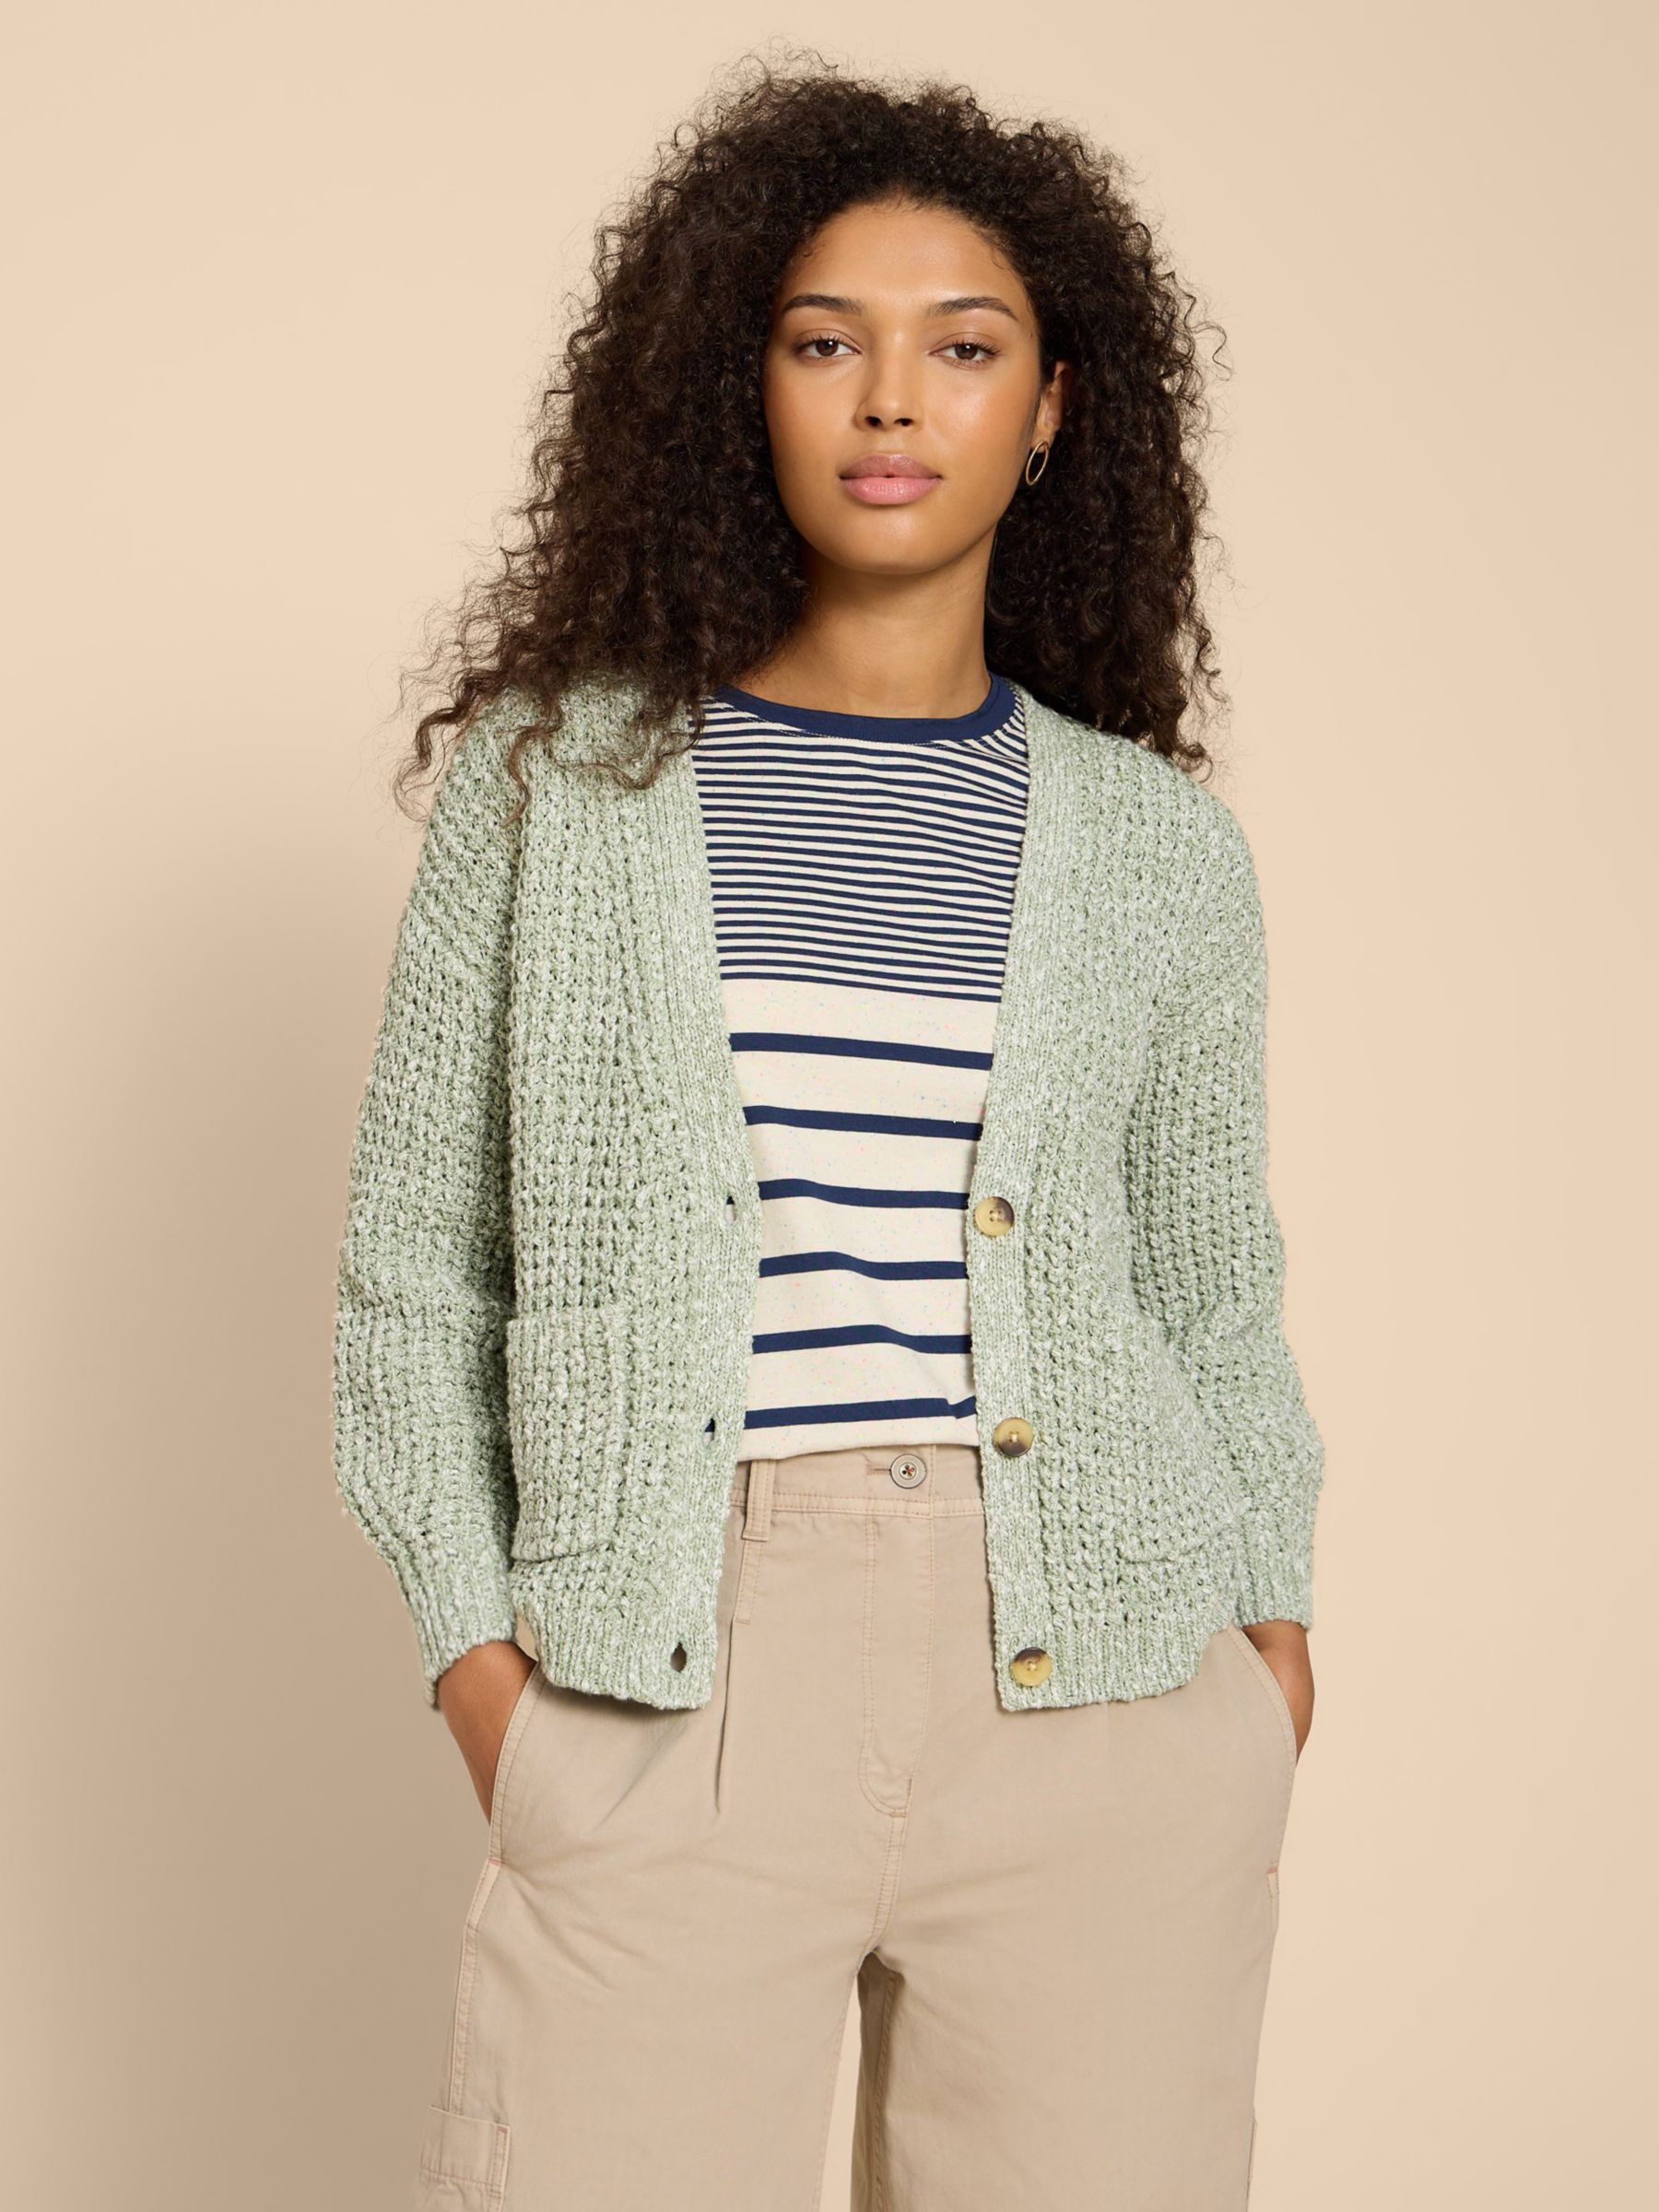 Women's Chunky Cardigans, Explore our New Arrivals